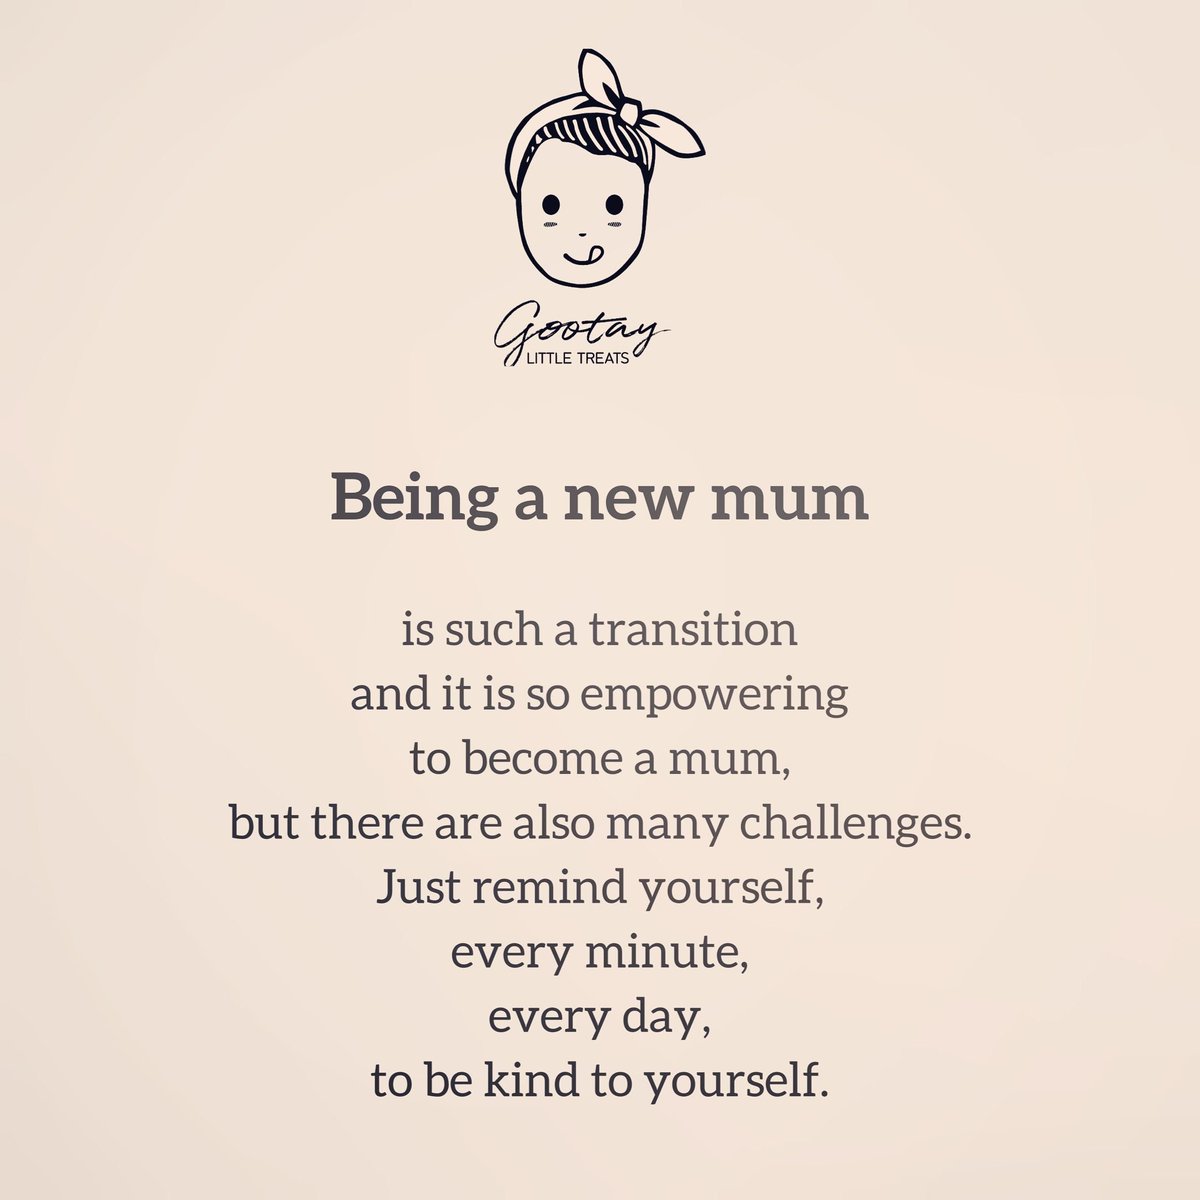 Day 4 of MMHAW - Finding you in this journey. Looking at your identity when becoming a Mum. #BeKindToYourself #Identity